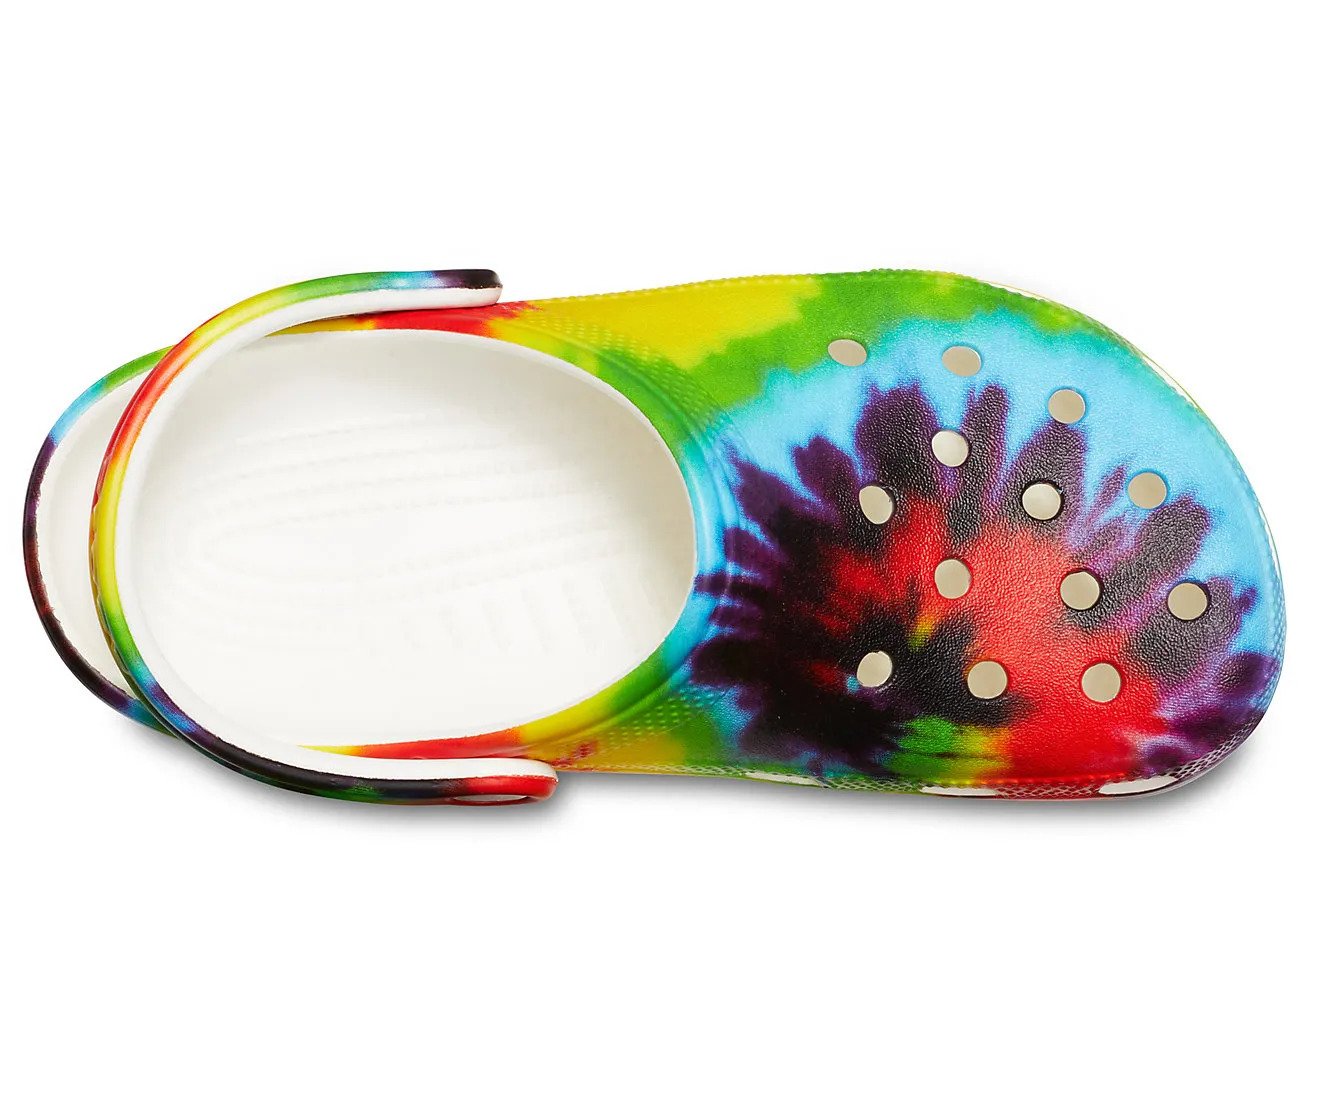 CLASSIC TIE-DYE GRAPHIC CLOG-205453-90h